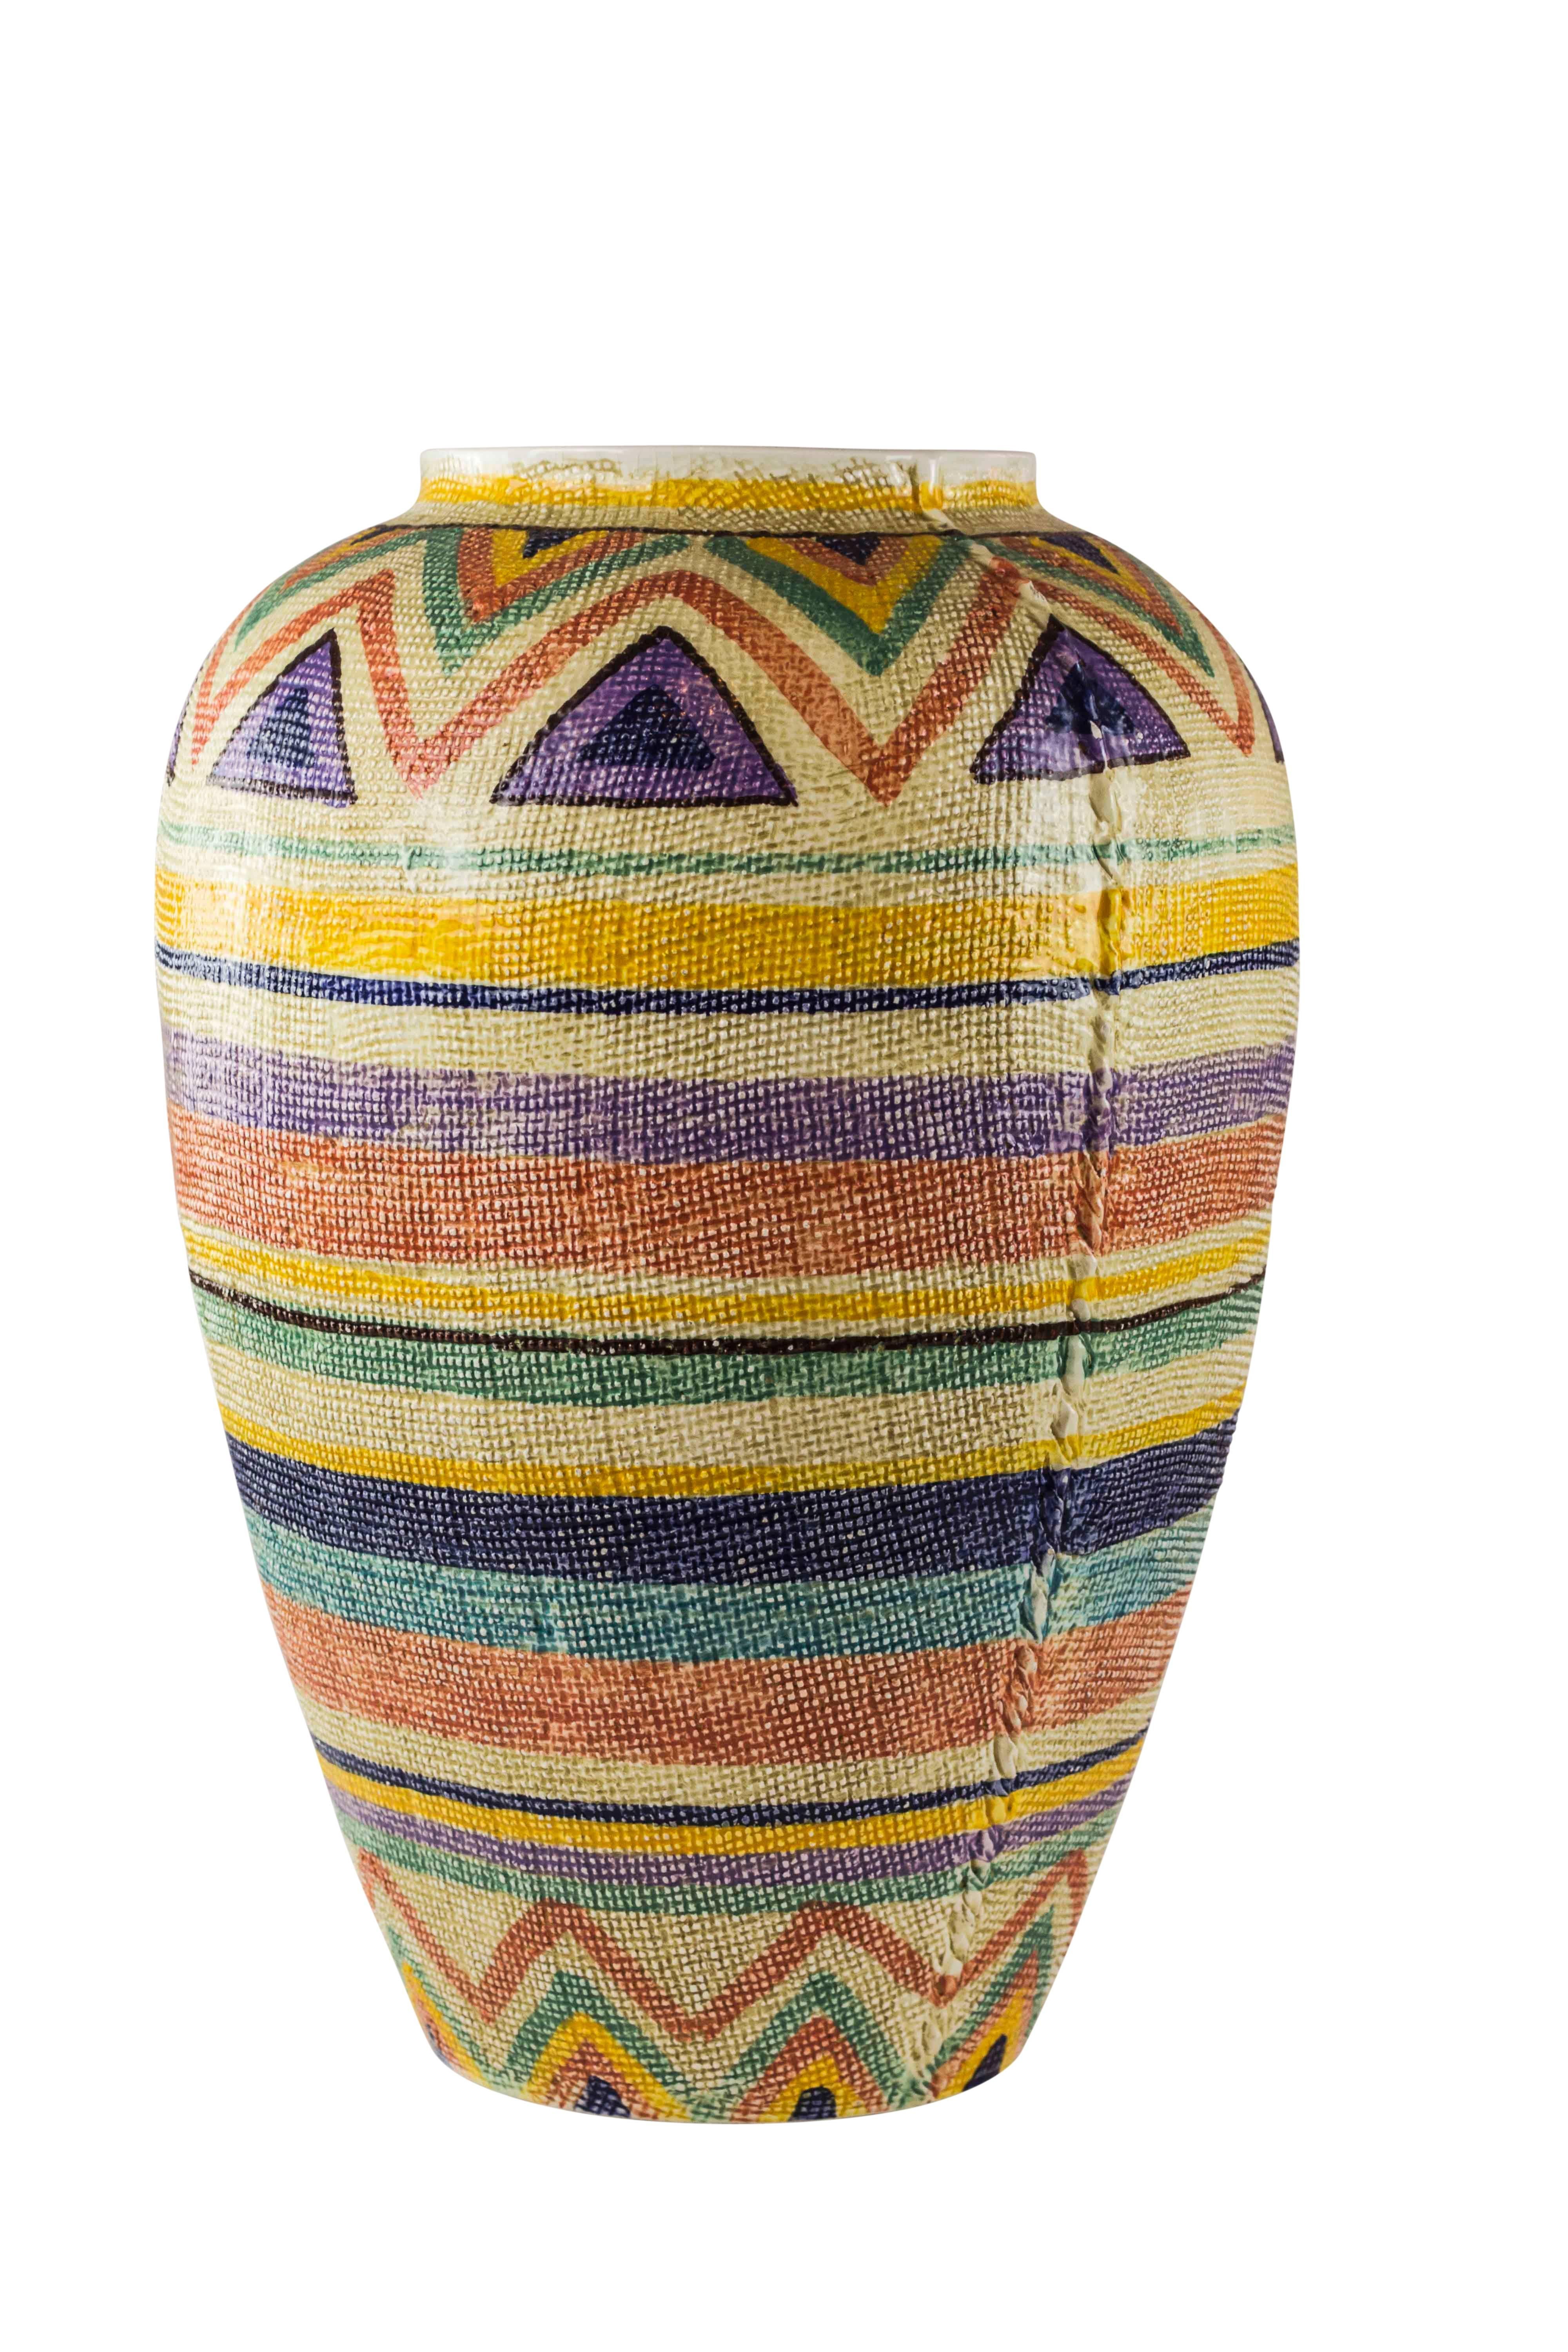 Large Italian ceramic woven textured floor vase, Italy, 1970s. Large vase with woven pattern. Marked on underside of vase: Made in Italy 1103/40.